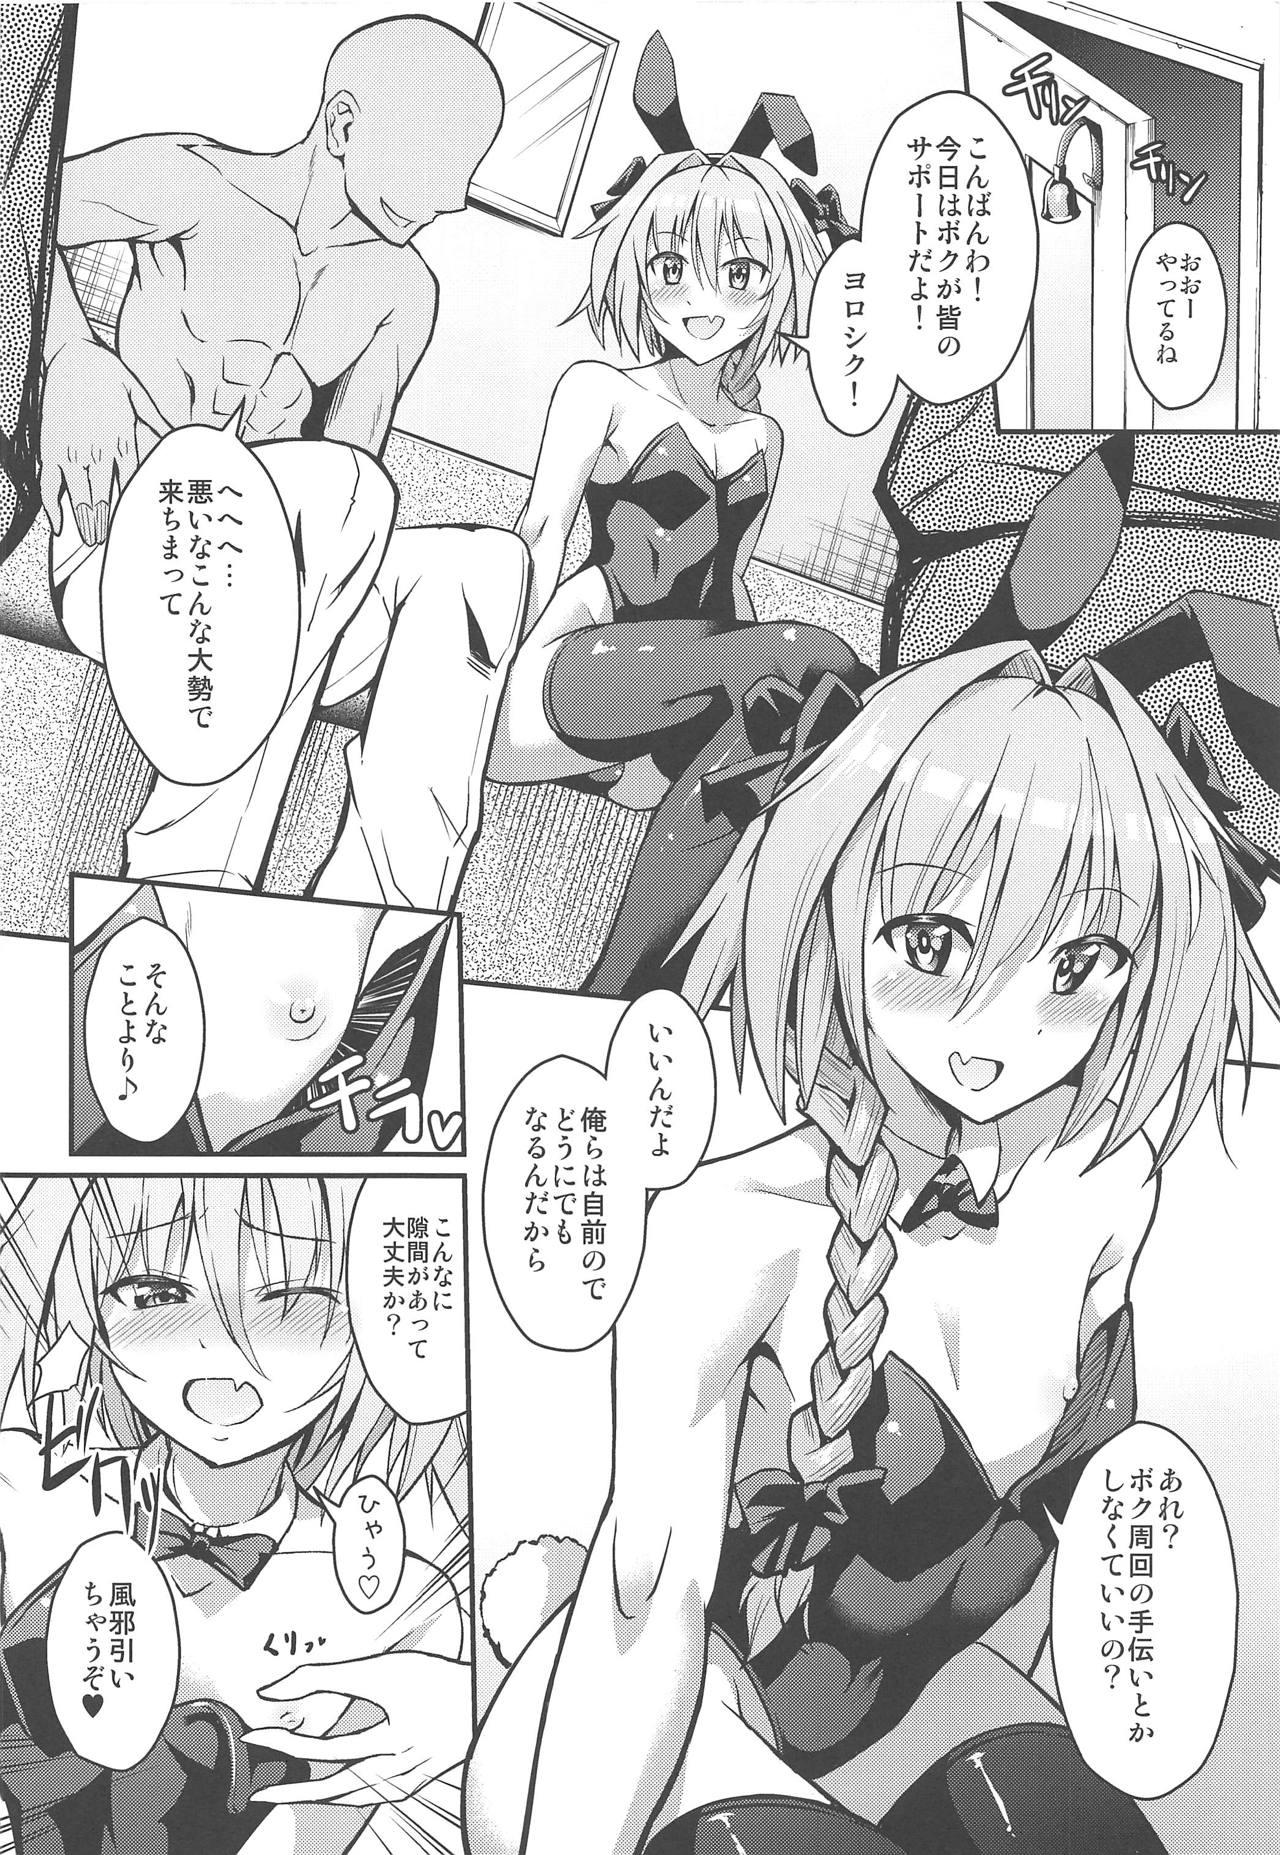 Butts Eirei Seisou: Astolfo - Fate grand order Sola - Page 3